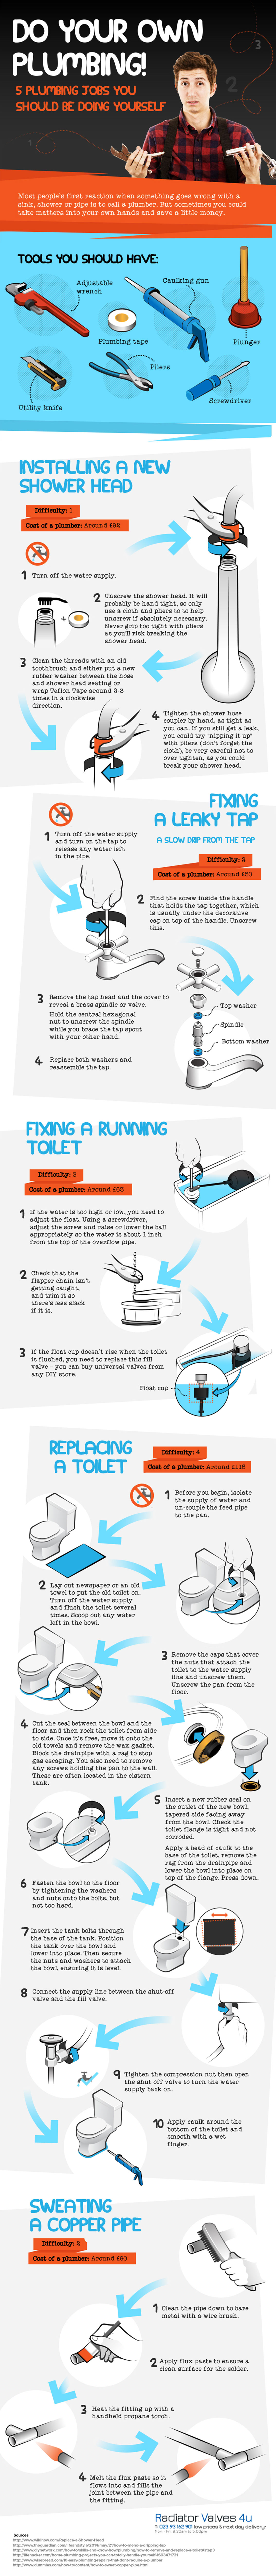 Plumbing Jobs You Should Be Doing Yourself Infographic